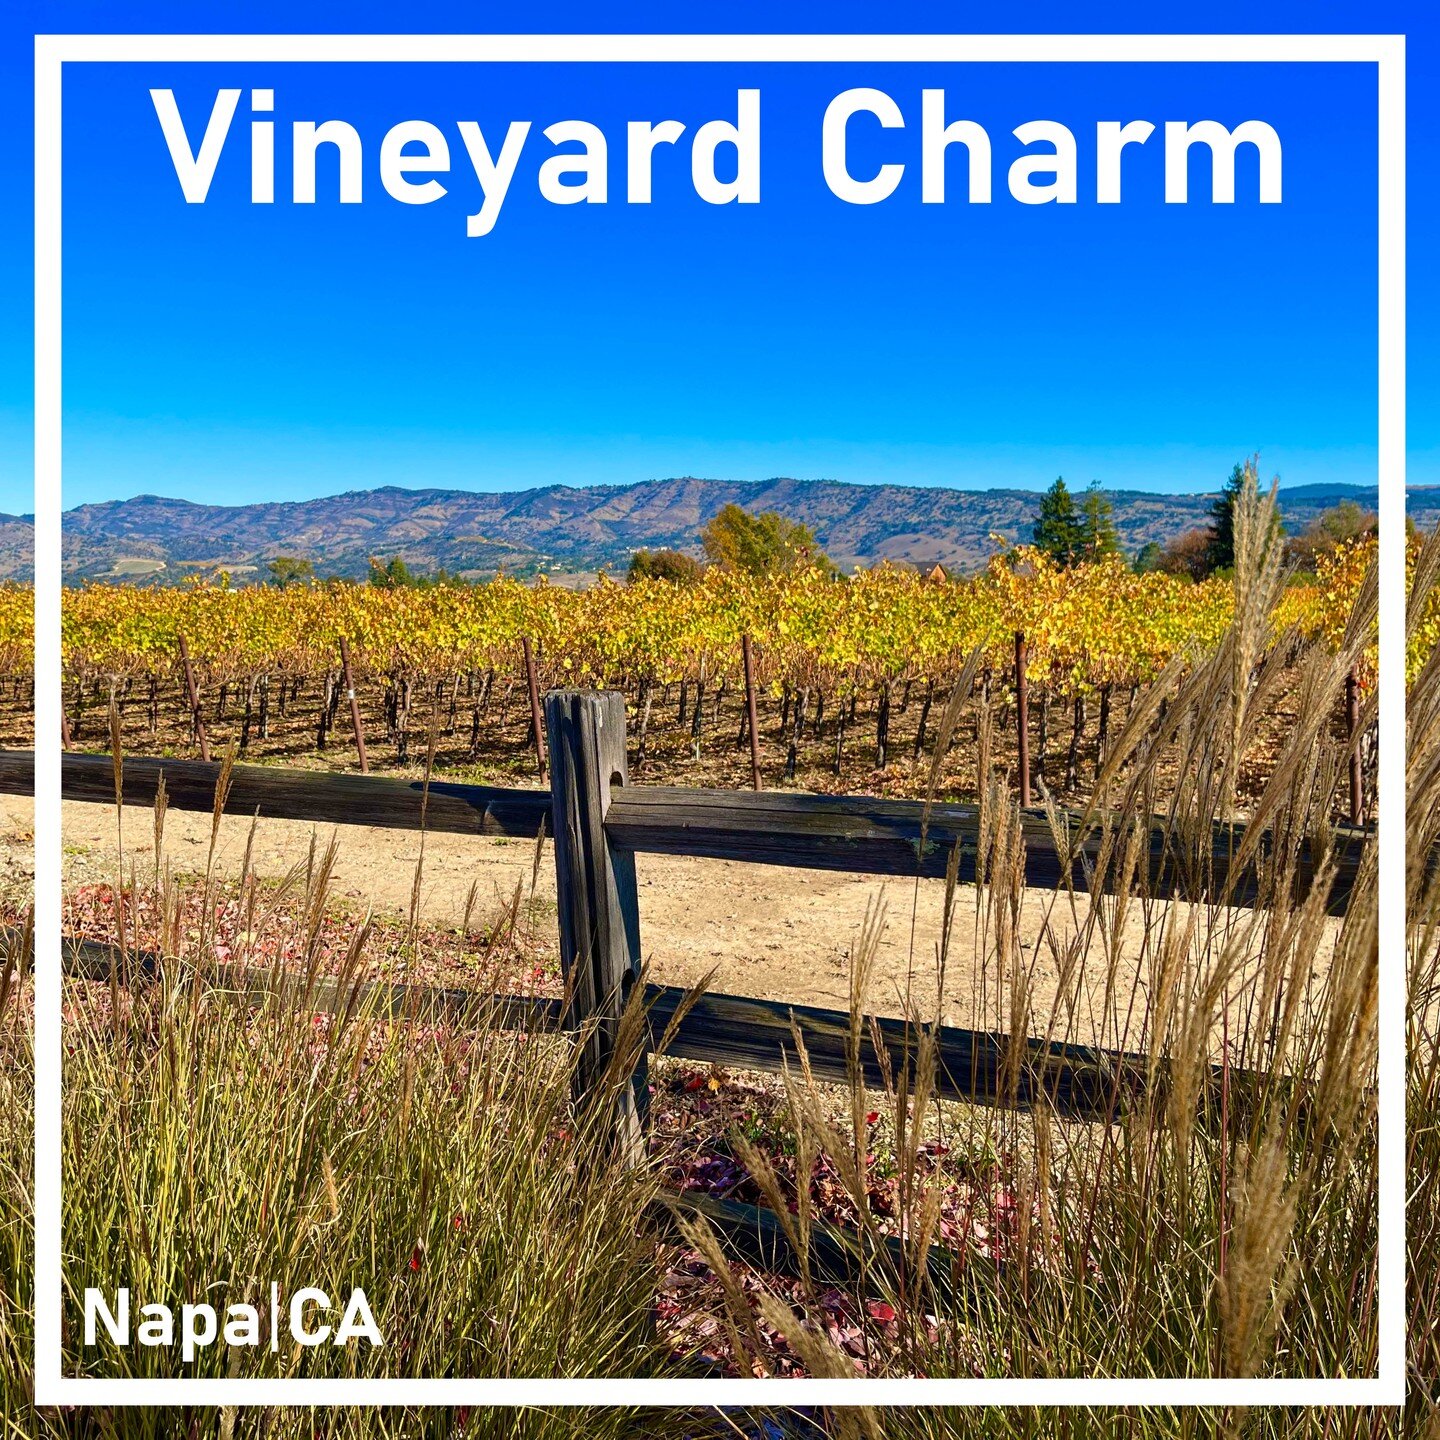 Set within a 15-acre vineyard, the client asked us to follow three design principles: &ldquo;balance, restraint, and respect for terroir.&rdquo;

Water-conservation in this drought-prone region of the Napa Valley requires a thoughtful approach to pla